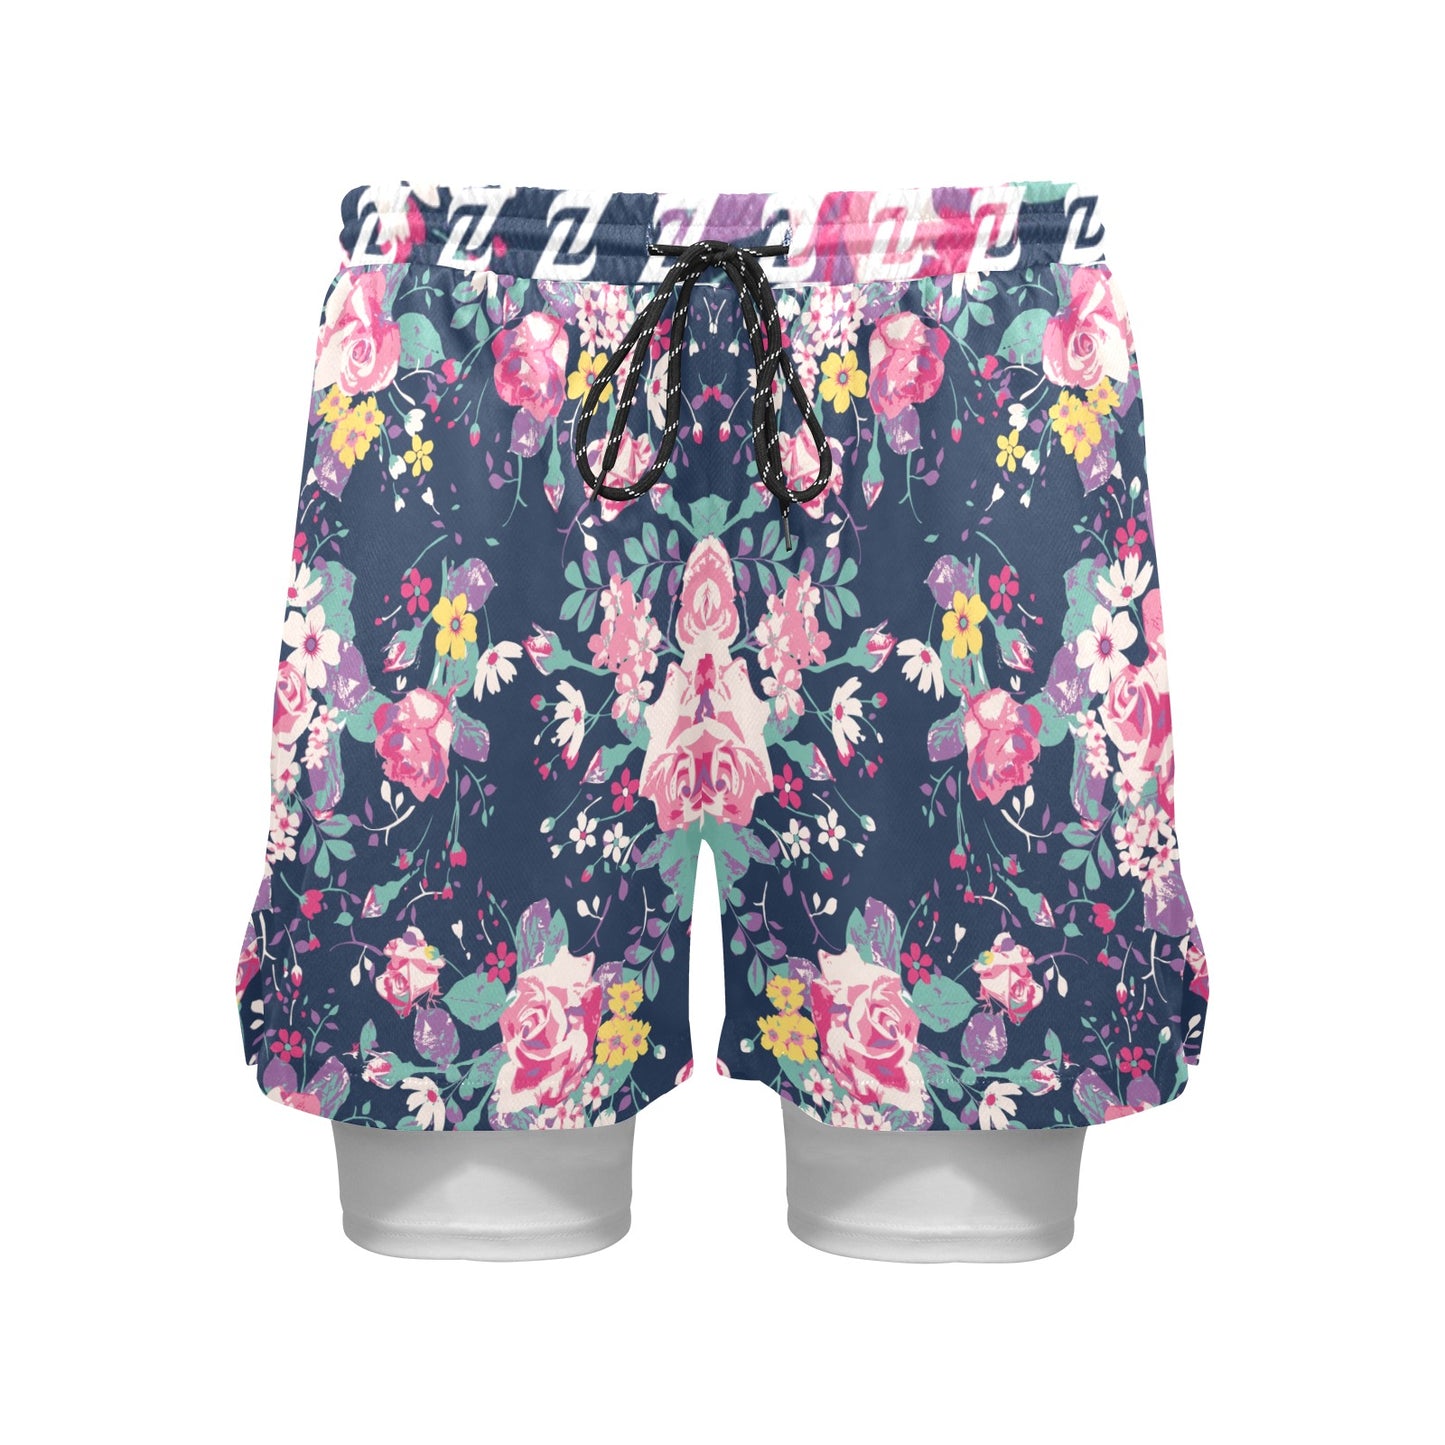 Zen Shorts with Liner - Floral